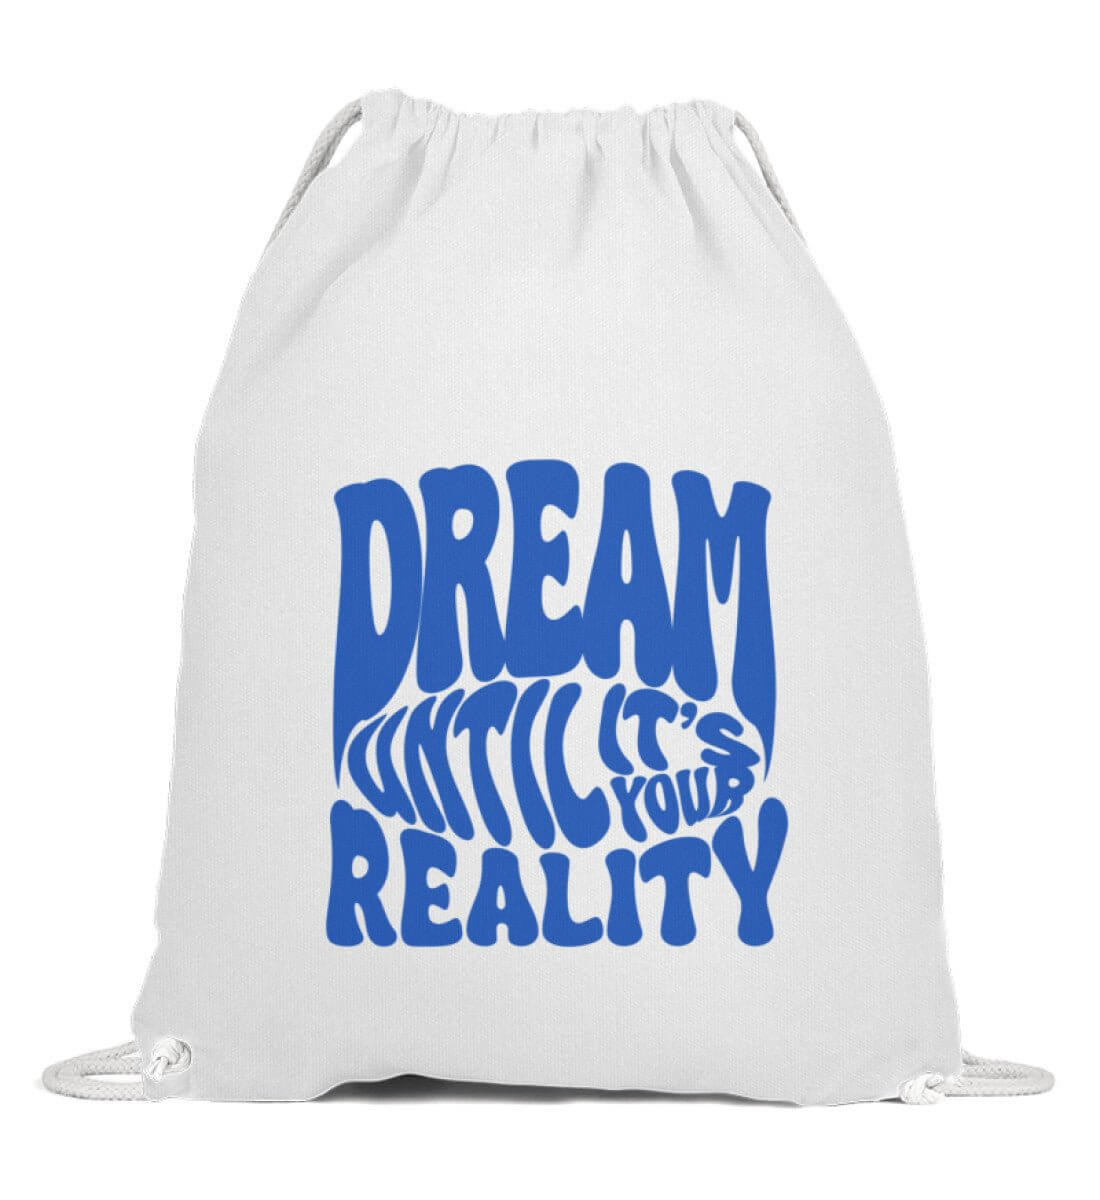 'DREAM UNTIL IT'S YOUR REALITY' Gymbag